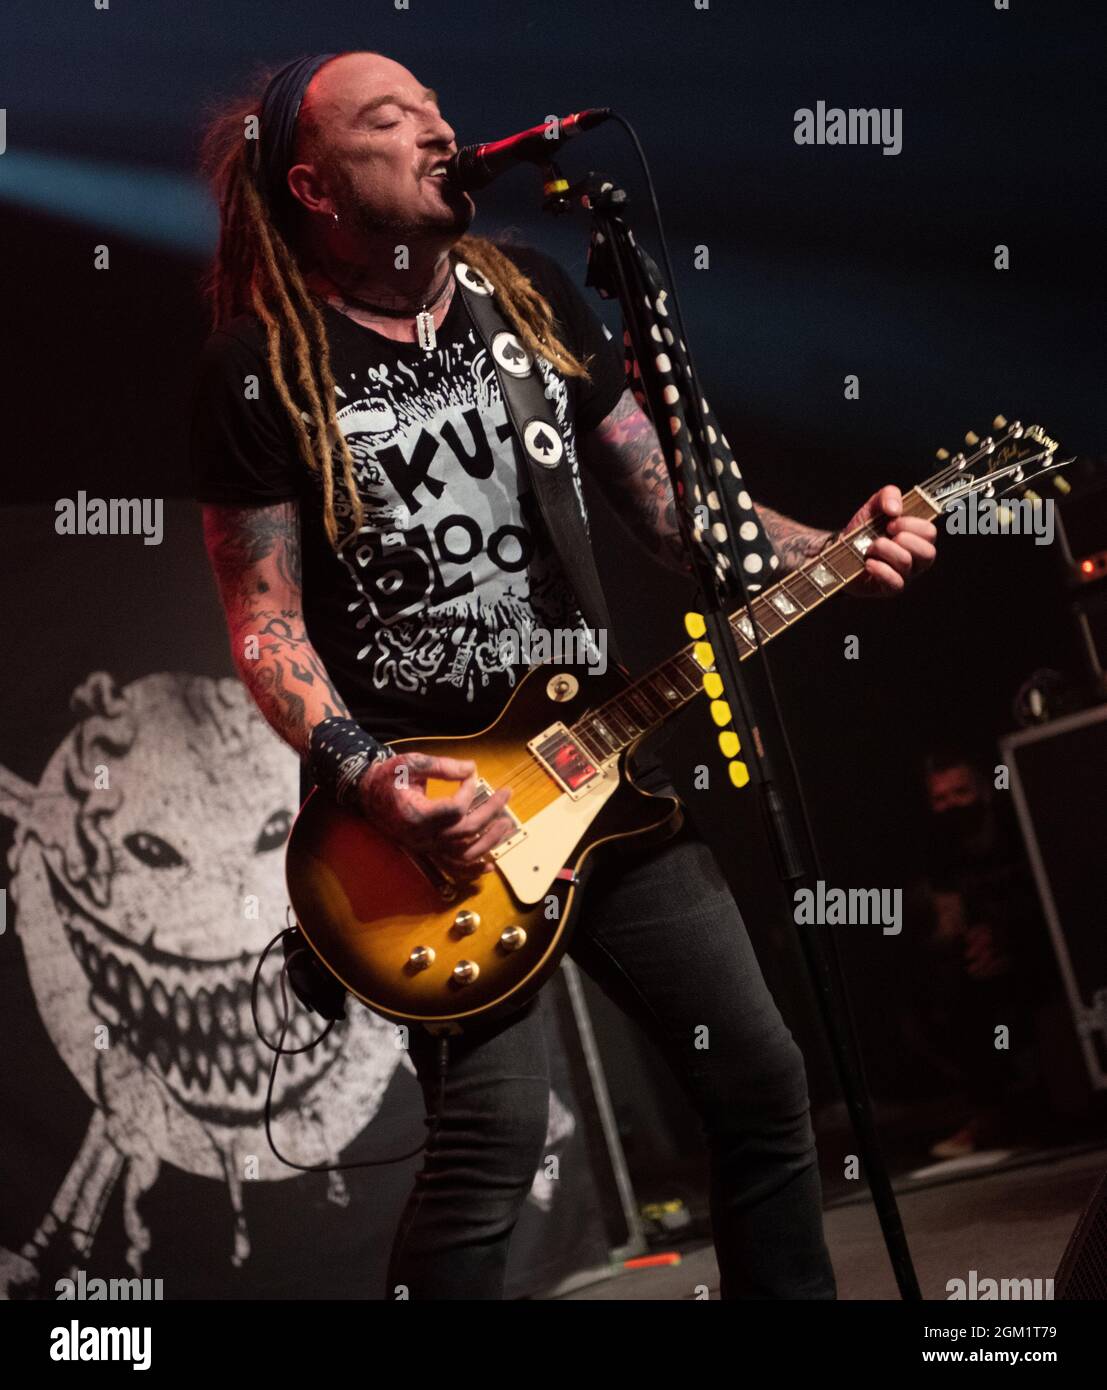 The Wildhearts (Ginger Wildheart) at KK's Steel Mill, Wolverhampton., 15 September 2021. Live Music Photography. The first show back at KK's Steel Mill since lockdown. The Wildhearts released their new album '21st Century Love Songs' on September 3rd 2021. Stock Photo